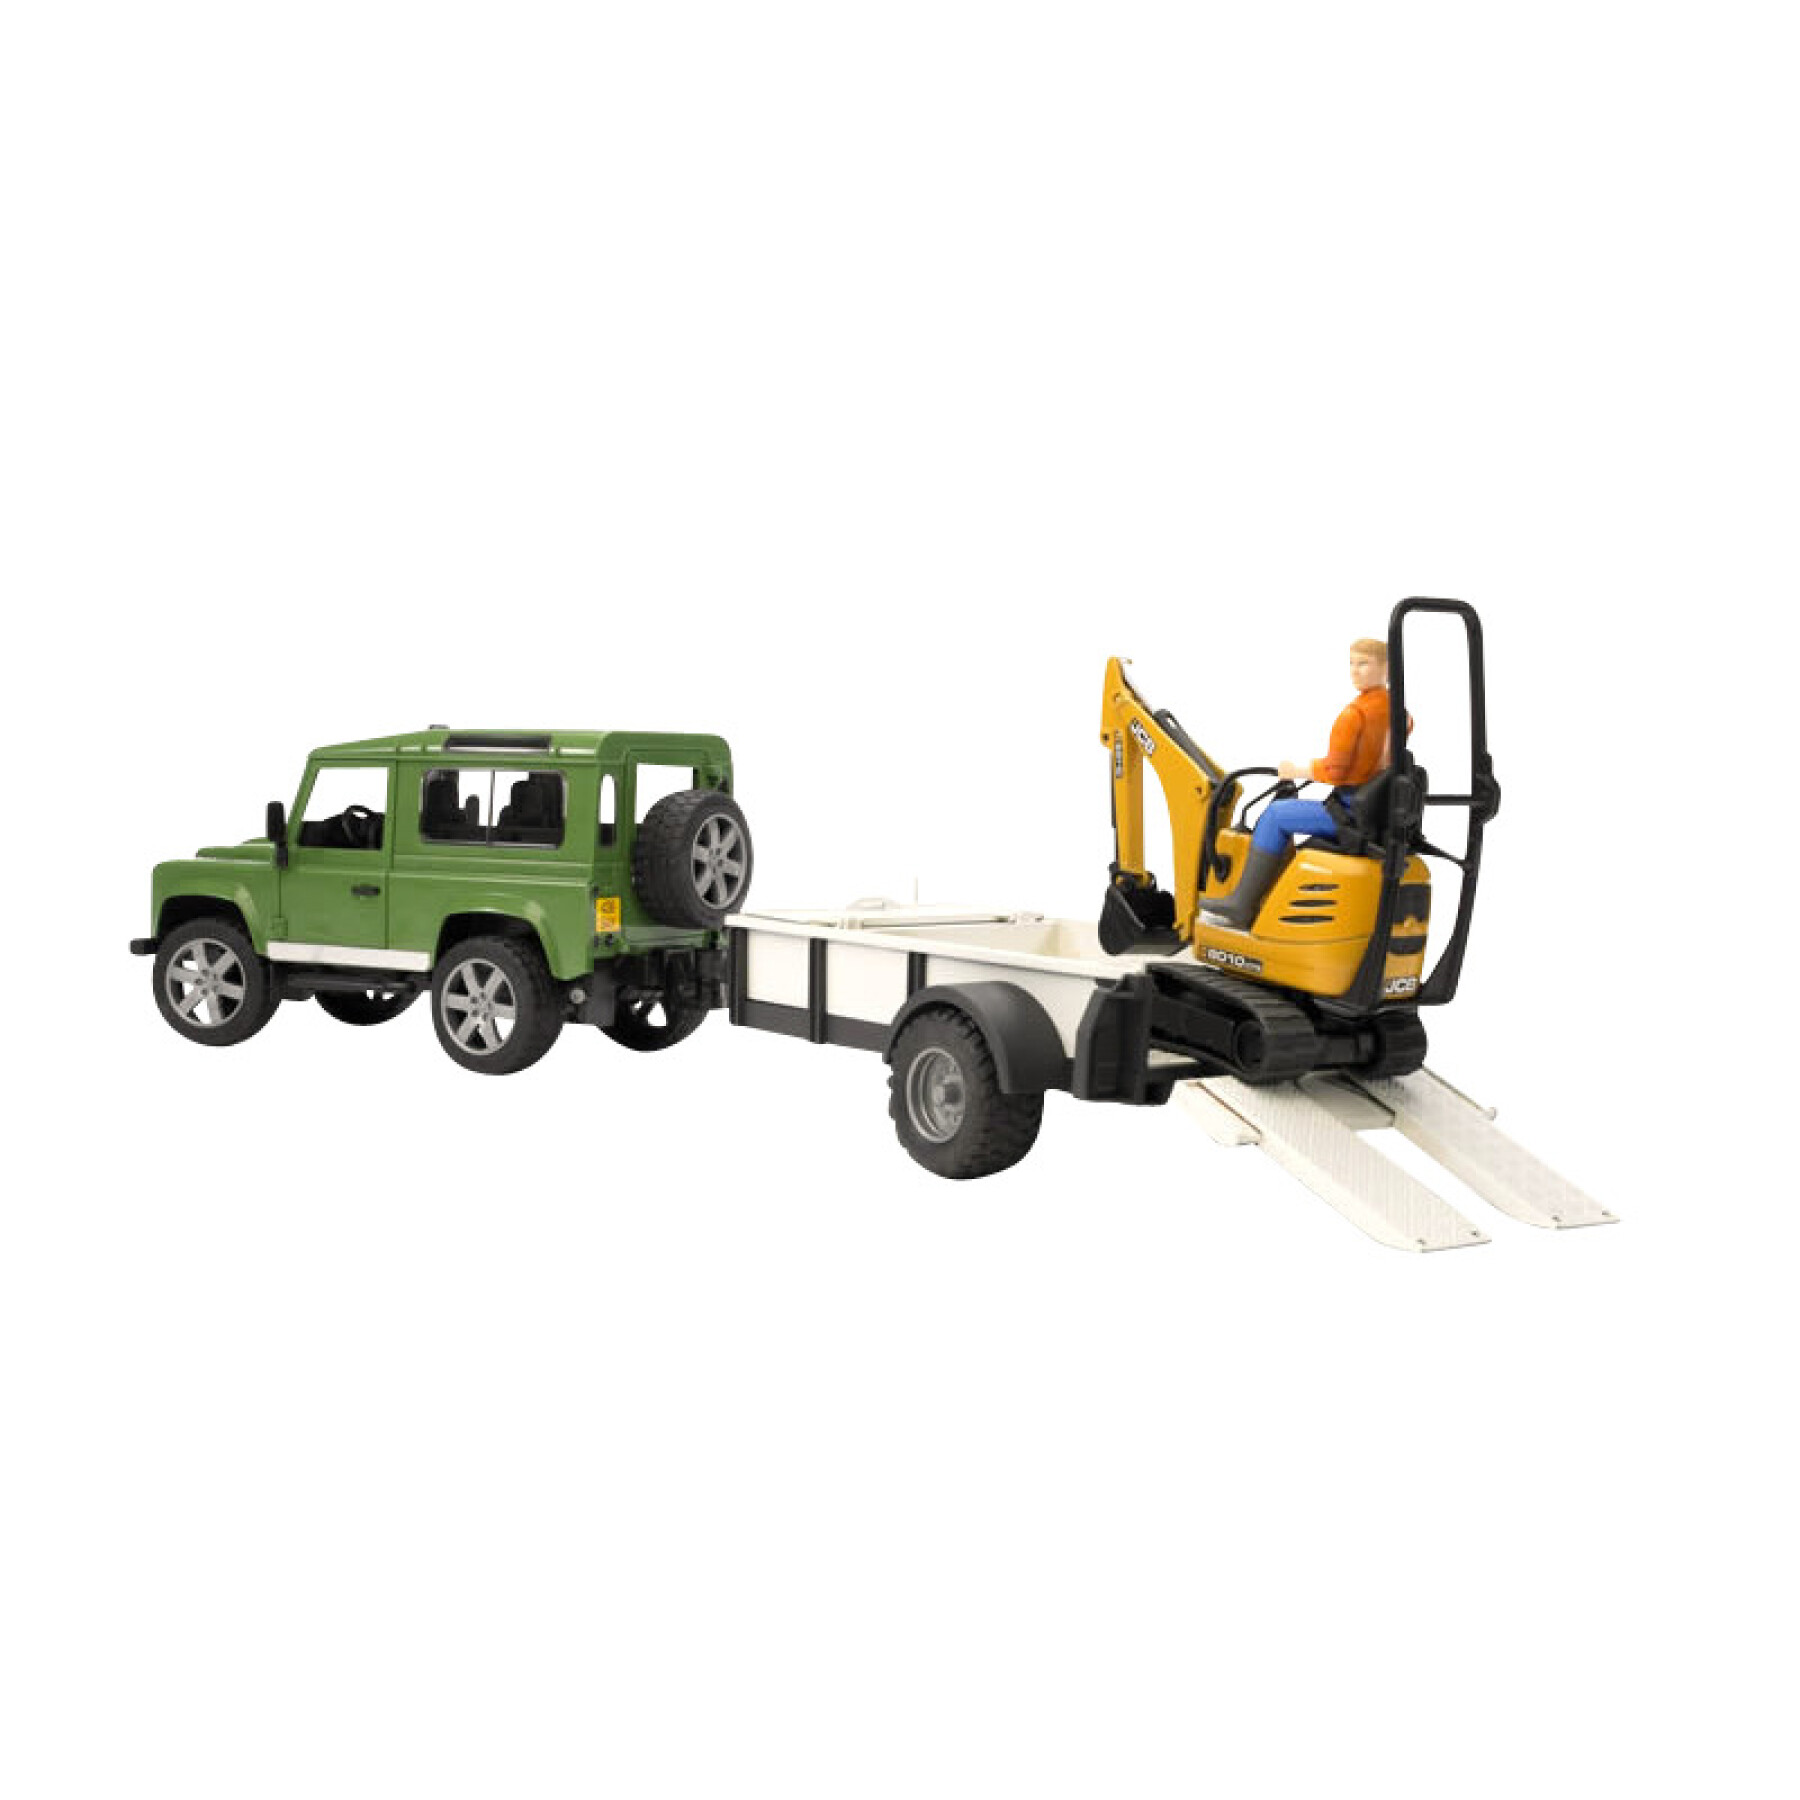 Car games - land rover defender with trailer, mini digger and construction man Bruder